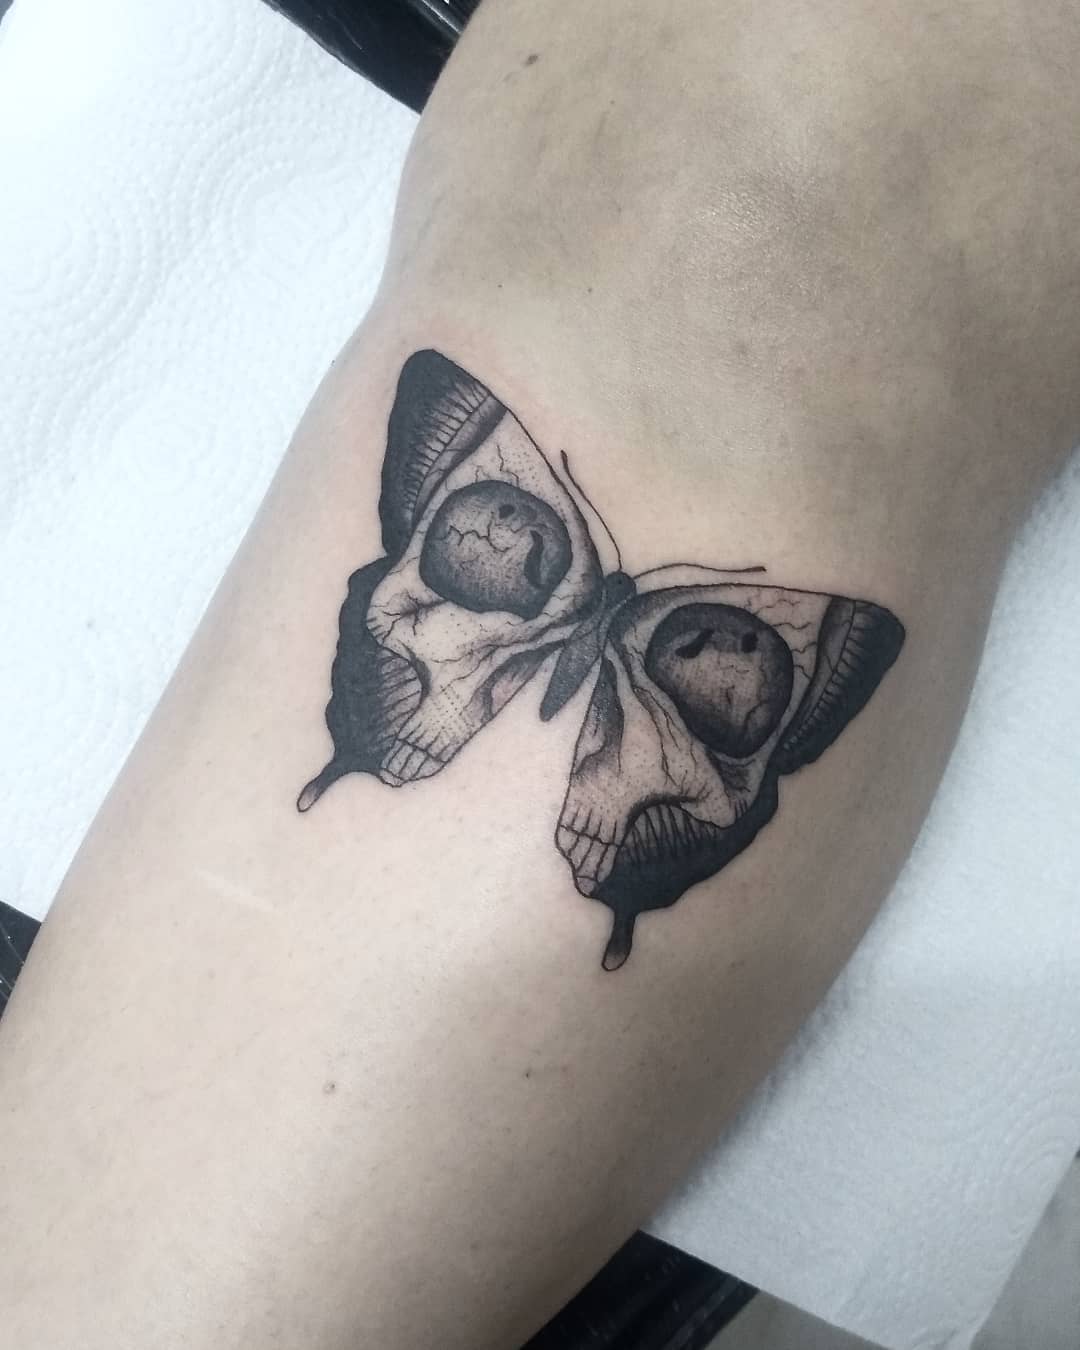 medium-sized black and grey tattoo on man's lower leg of a surrealistic butterfly with skull face in its wings